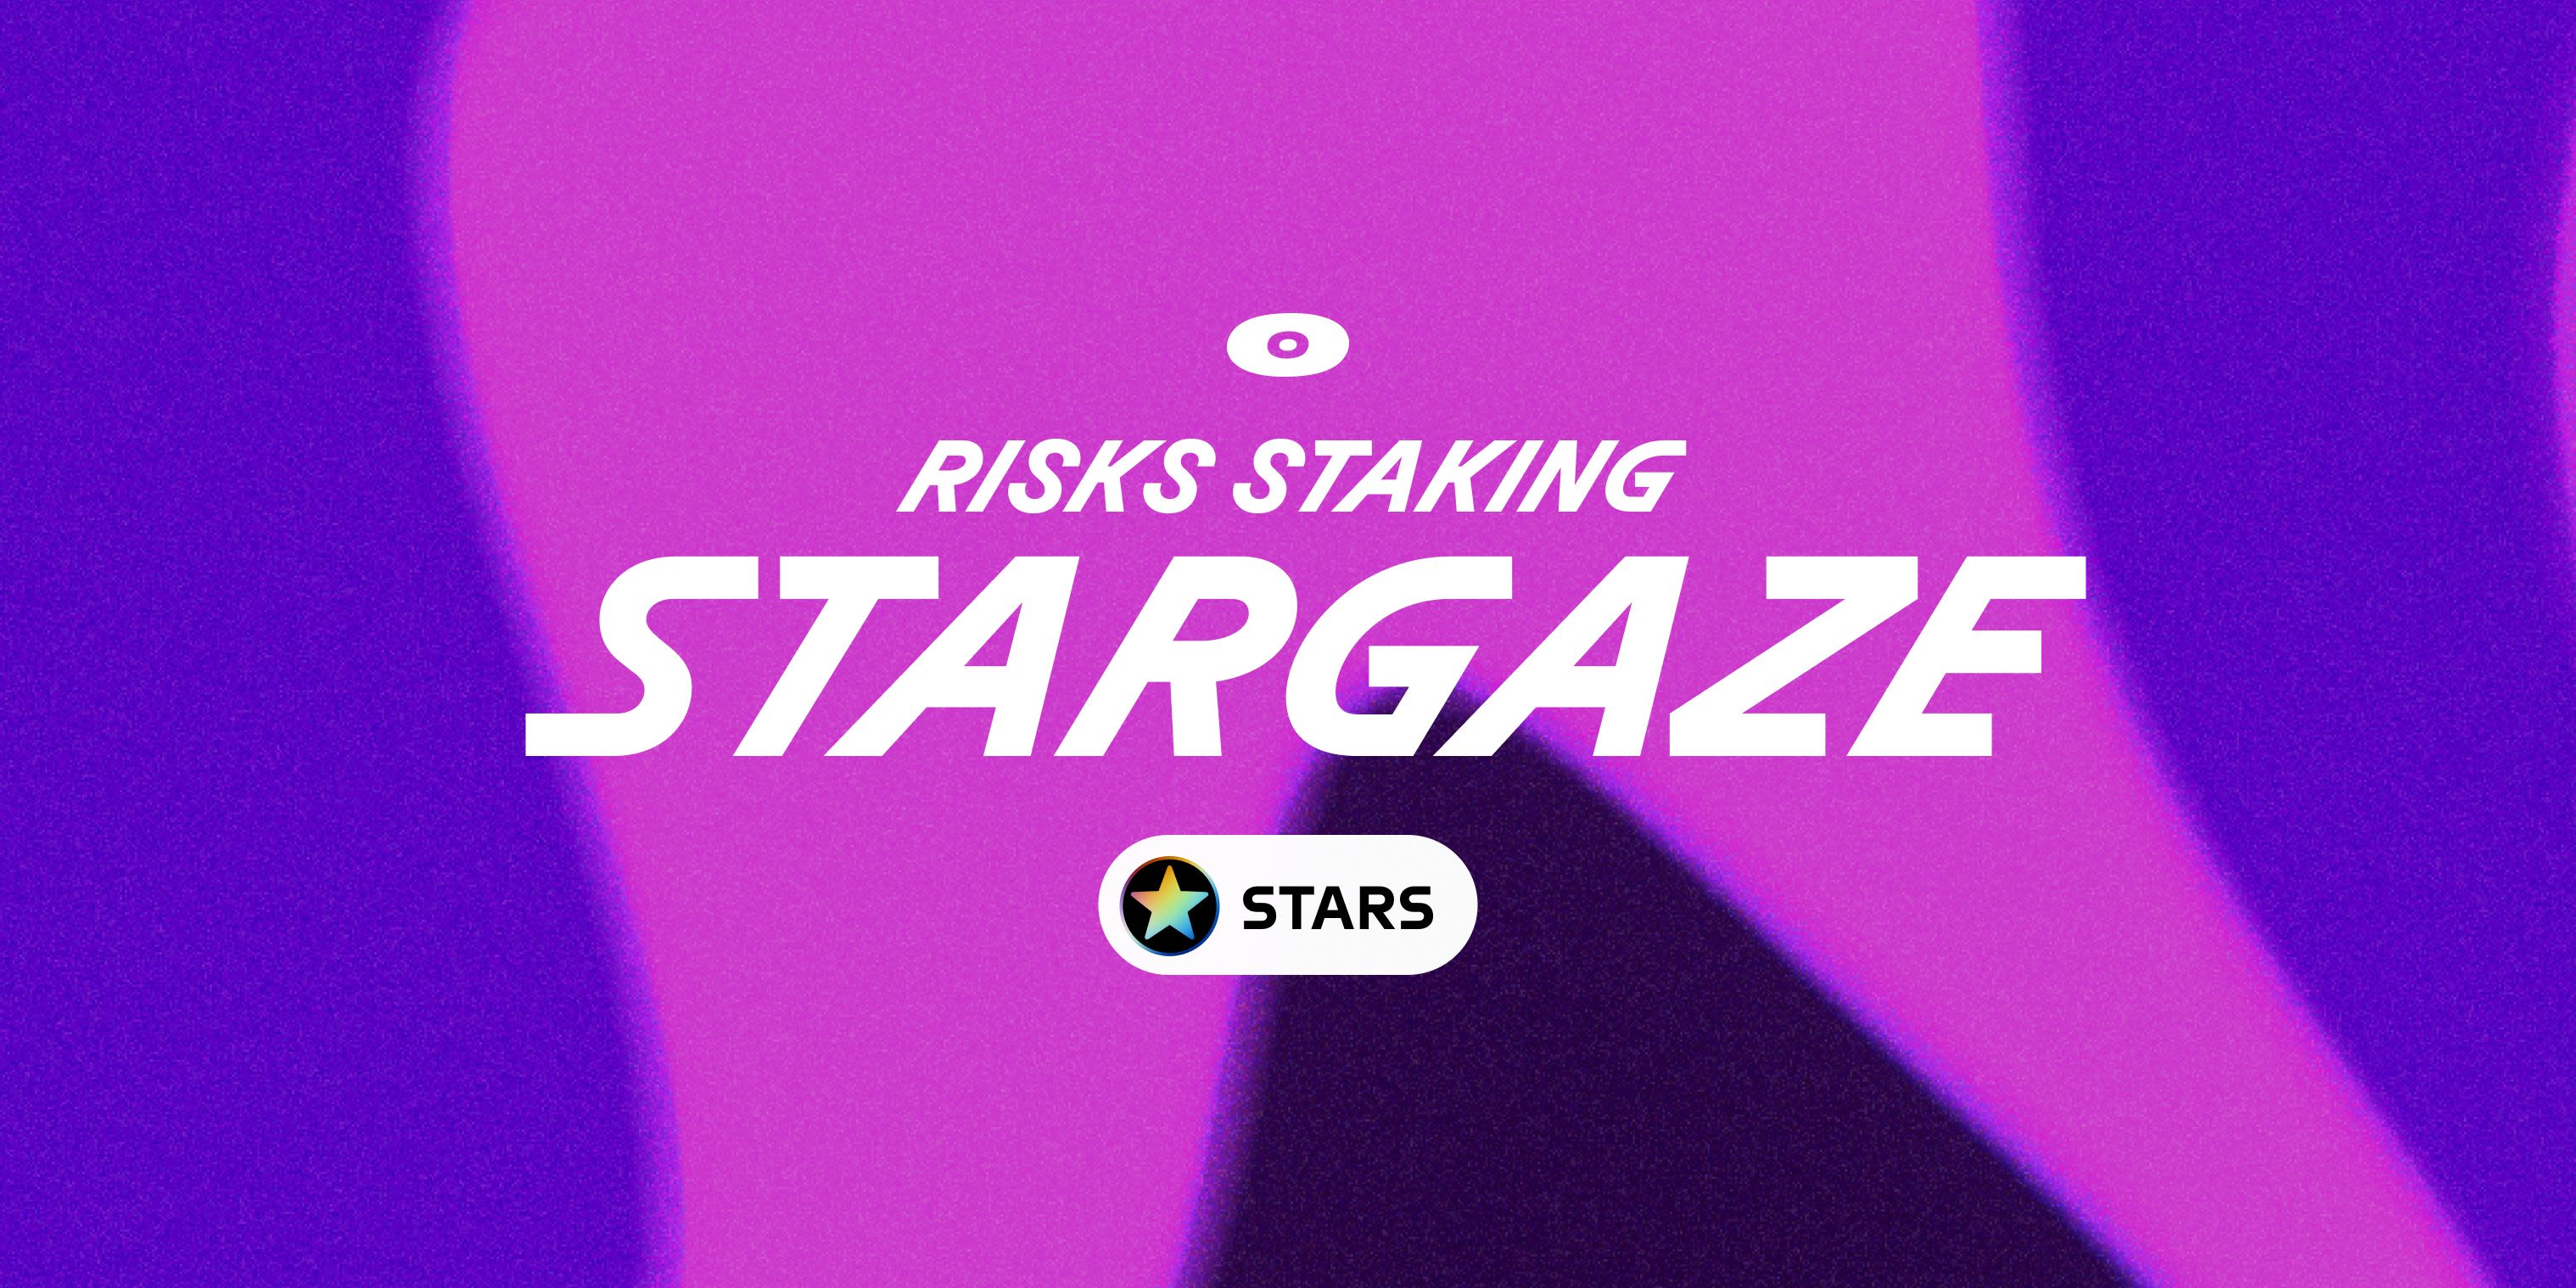 Cover image for Risks of staking STARS